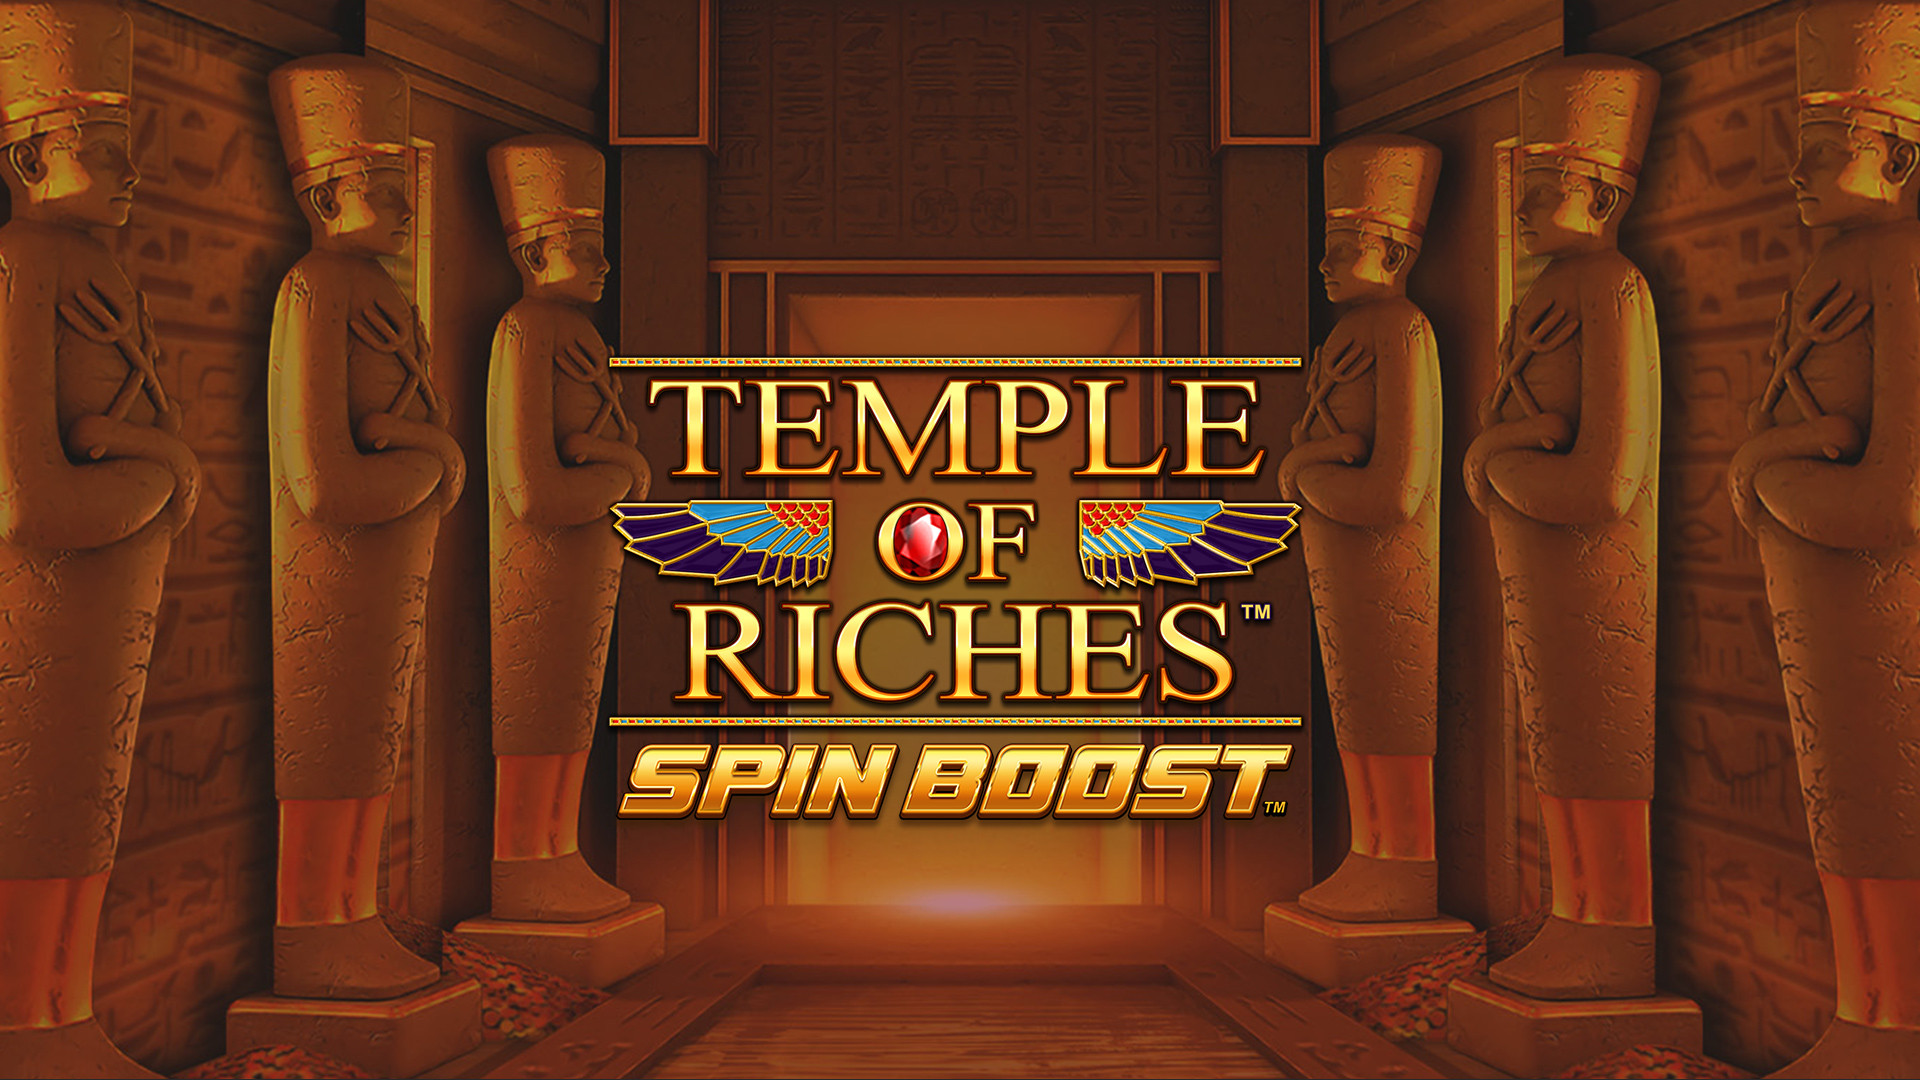 Temple of Riches Spin Boost